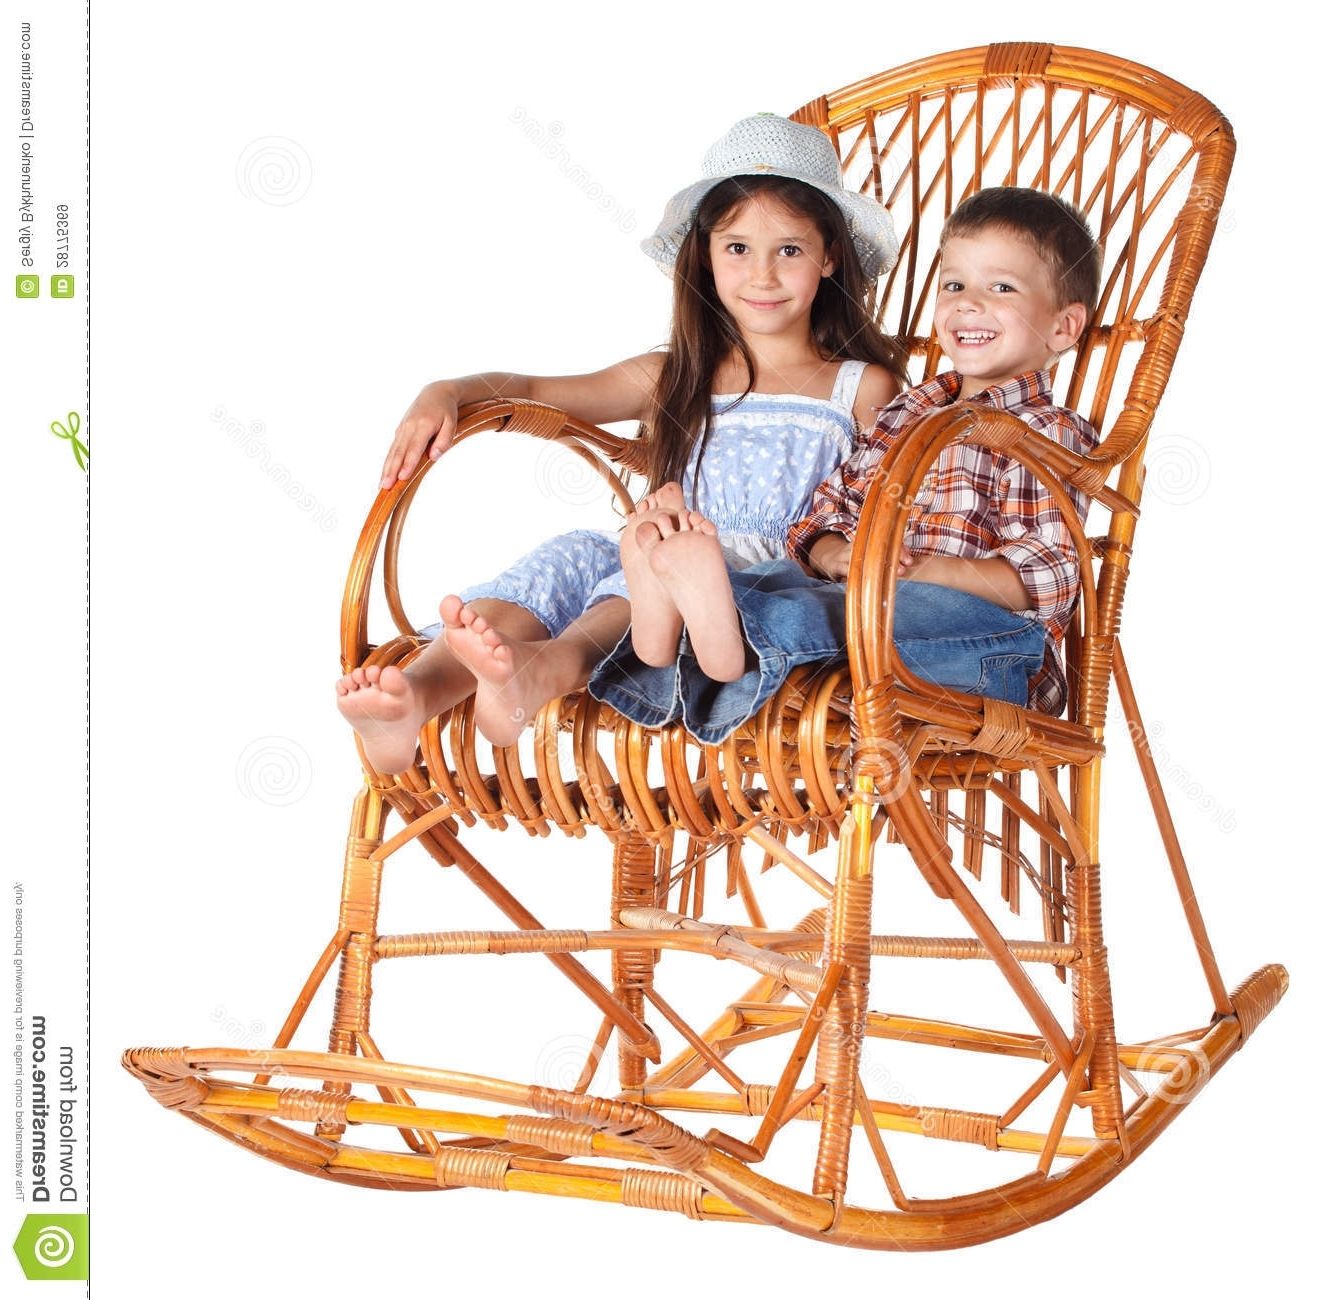 Xl Rocking Chairs Inside Most Current Two Kids Sitting In The Rocking Chair Stock Image – Image Of Pair (View 5 of 15)